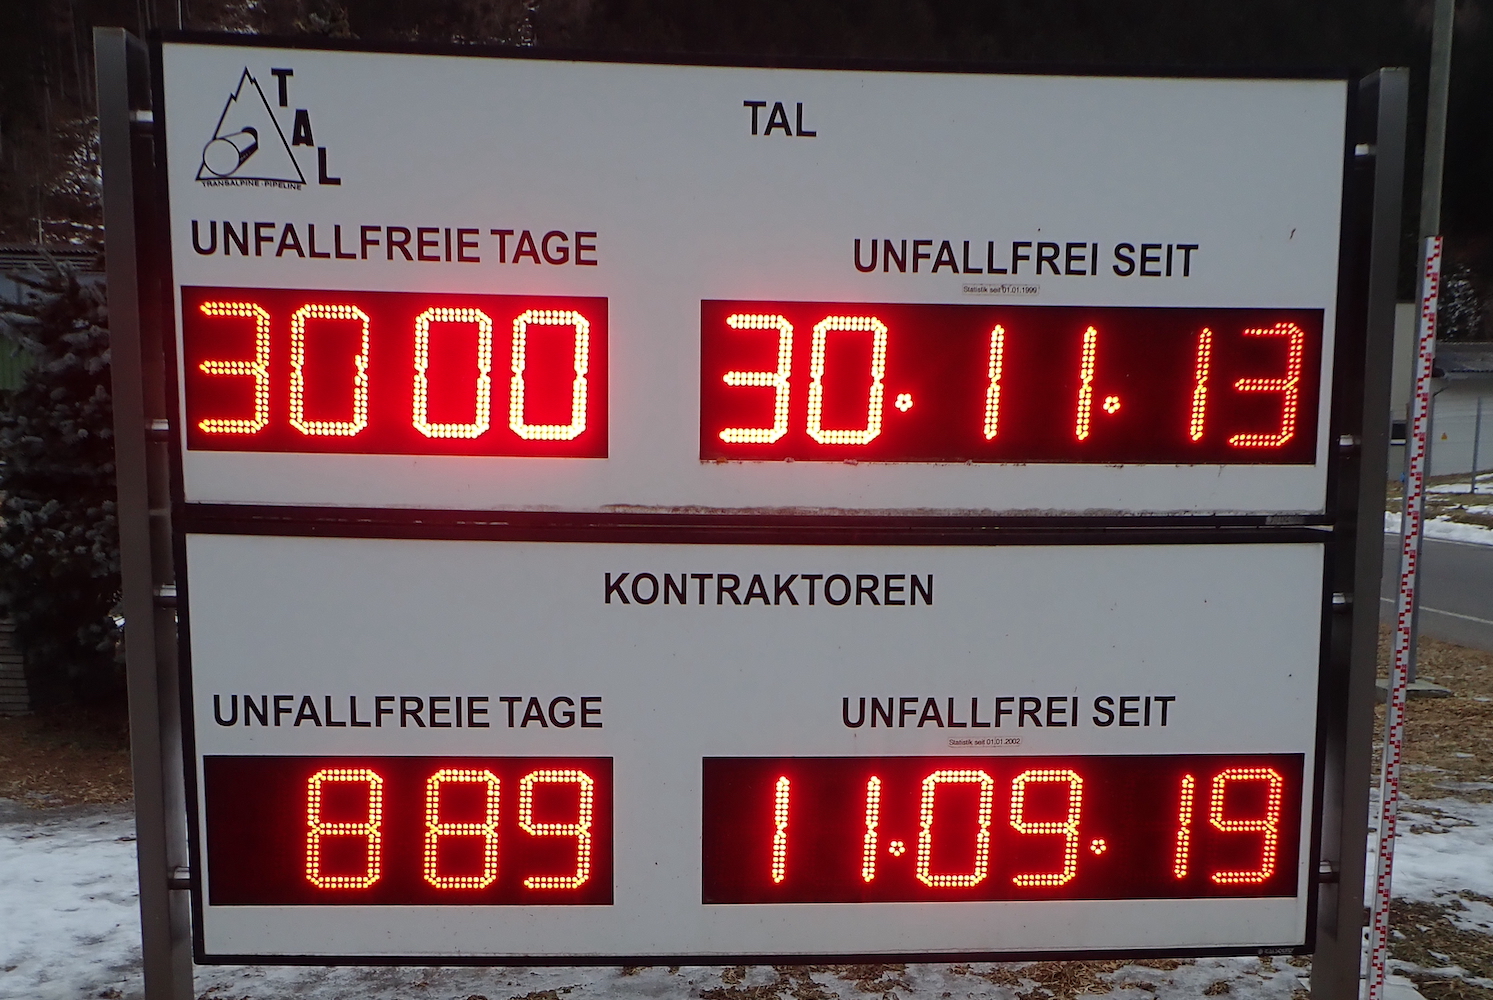 Working in safety: TAL Austria accident-free for more than 3,000 days